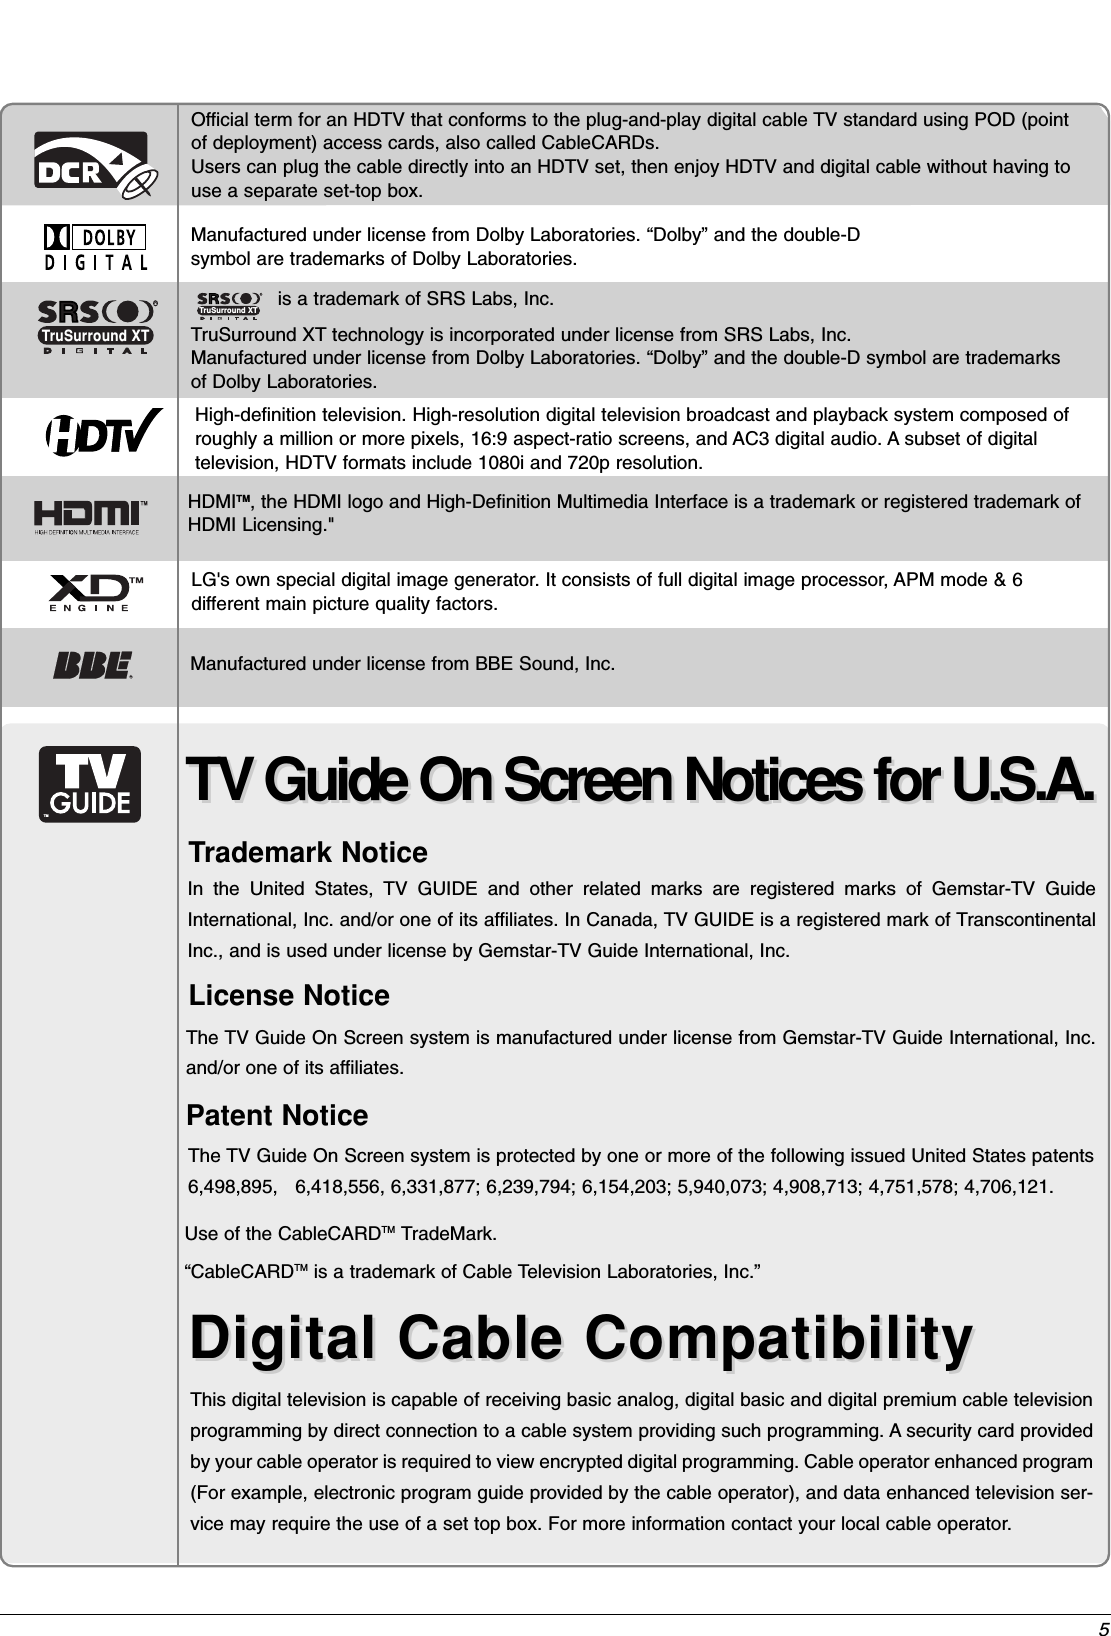 5TV Guide On Screen Notices for U.S.A.TV Guide On Screen Notices for U.S.A.Digital Cable CompatibilityDigital Cable CompatibilityThis digital television is capable of receiving basic analog, digital basic and digital premium cable televisionprogramming by direct connection to a cable system providing such programming. A security card providedby your cable operator is required to view encrypted digital programming. Cable operator enhanced program(For example, electronic program guide provided by the cable operator), and data enhanced television ser-vice may require the use of a set top box. For more information contact your local cable operator.Official term for an HDTV that conforms to the plug-and-play digital cable TV standard using POD (pointof deployment) access cards, also called CableCARDs.Users can plug the cable directly into an HDTV set, then enjoy HDTV and digital cable without having touse a separate set-top box.Manufactured under license from Dolby Laboratories. “Dolby” and the double-Dsymbol are trademarks of Dolby Laboratories. is a trademark of SRS Labs, Inc.TruSurround XT technology is incorporated under license from SRS Labs, Inc.Manufactured under license from Dolby Laboratories. “Dolby” and the double-D symbol are trademarks of Dolby Laboratories. RTruSurround XTTMHDMITM, the HDMI logo and High-Definition Multimedia Interface is a trademark or registered trademark ofHDMI Licensing.&quot;High-definition television. High-resolution digital television broadcast and playback system composed ofroughly a million or more pixels, 16:9 aspect-ratio screens, and AC3 digital audio. A subset of digital television, HDTV formats include 1080i and 720p resolution.LG&apos;s own special digital image generator. It consists of full digital image processor, APM mode &amp; 6 different main picture quality factors.RTruSurround XTIn the United States, TV GUIDE and other related marks are registered marks of Gemstar-TV GuideInternational, Inc. and/or one of its affiliates. In Canada, TV GUIDE is a registered mark of TranscontinentalInc., and is used under license by Gemstar-TV Guide International, Inc.The TV Guide On Screen system is protected by one or more of the following issued United States patents6,498,895,   6,418,556, 6,331,877; 6,239,794; 6,154,203; 5,940,073; 4,908,713; 4,751,578; 4,706,121.The TV Guide On Screen system is manufactured under license from Gemstar-TV Guide International, Inc.and/or one of its affiliates.Use of the CableCARDTM  TradeMark.“CableCARDTM  is a trademark of Cable Television Laboratories, Inc.”Trademark NoticeLicense NoticePatent NoticeManufactured under license from BBE Sound, Inc.